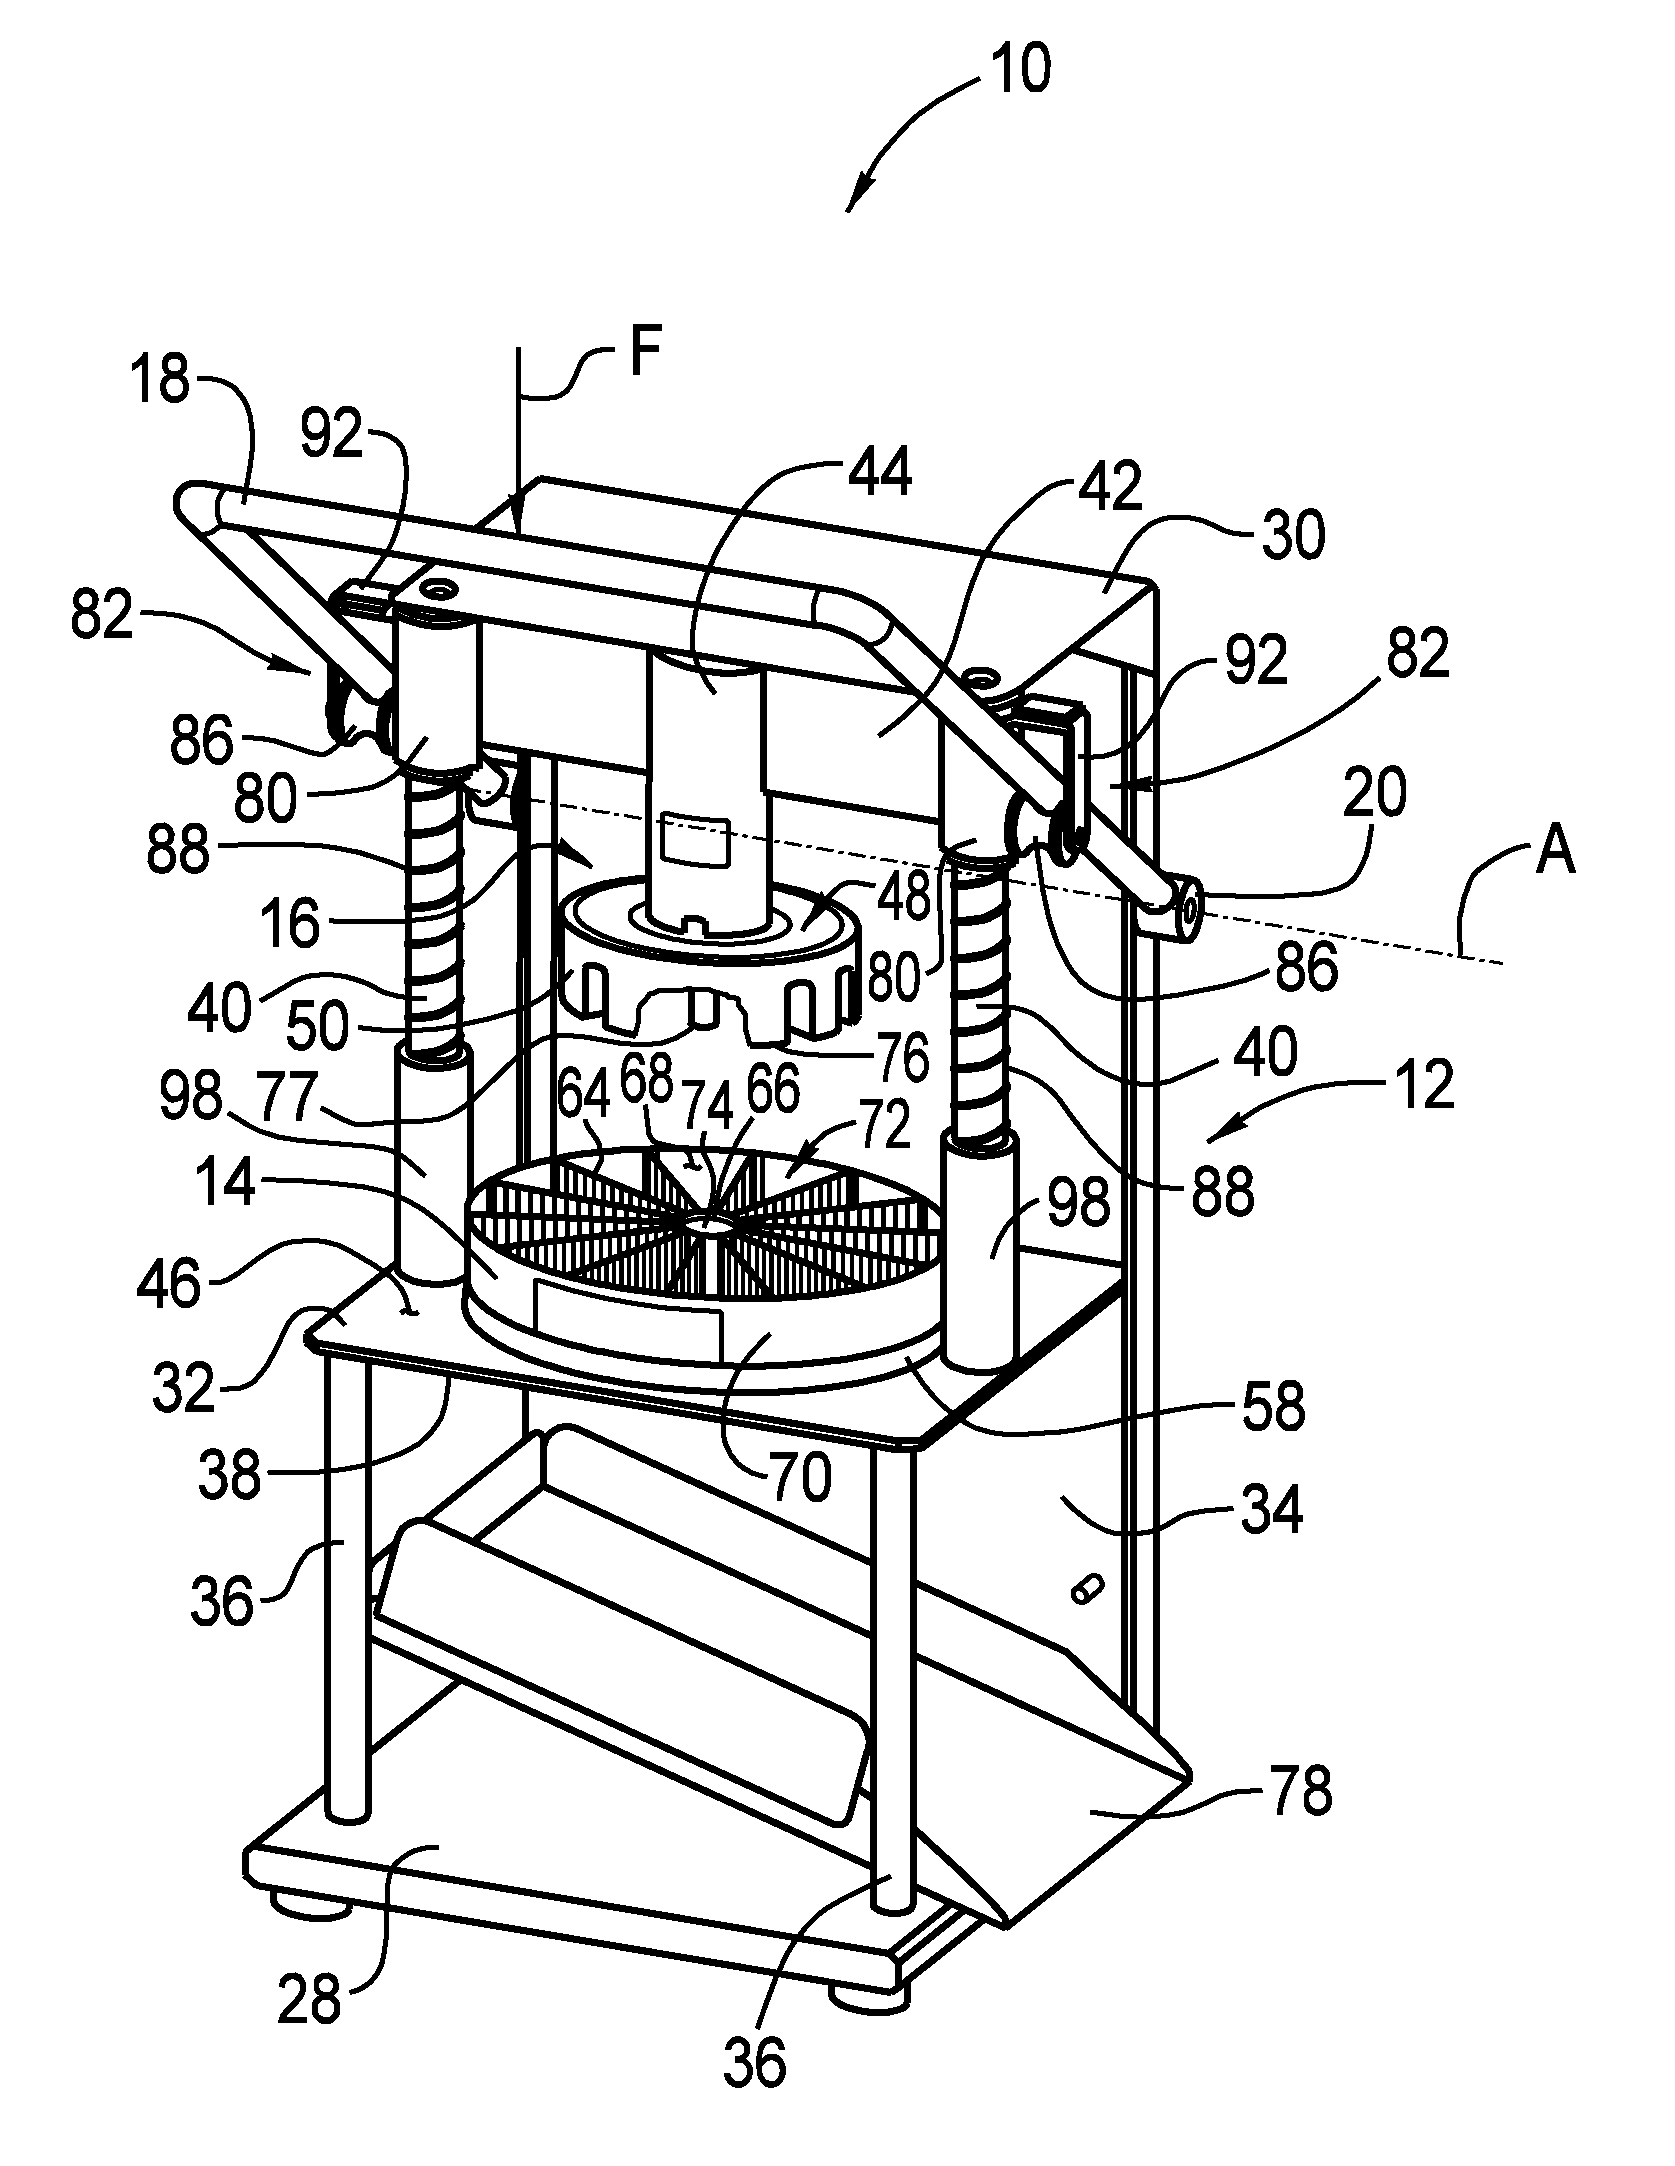 Sectioning device and method of use